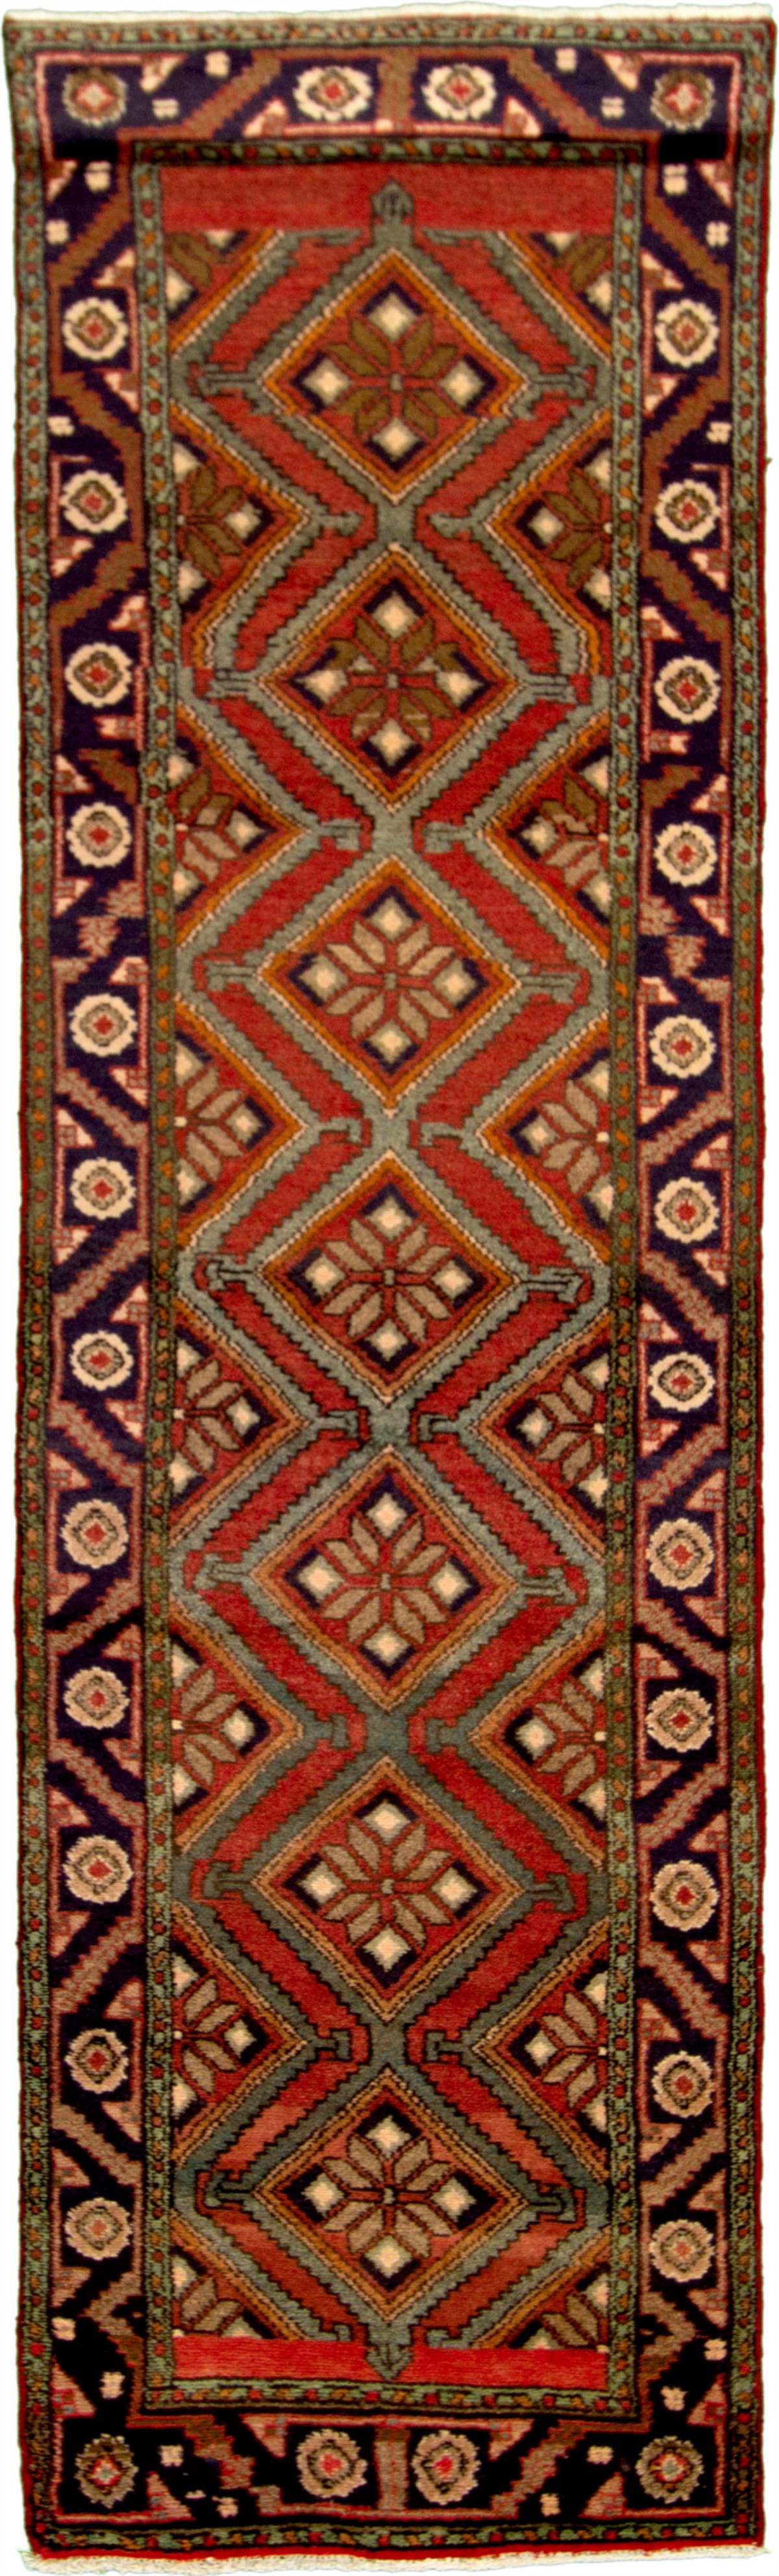 Hand-knotted Darjazin Brown, Red Wool Rug 2'5" x 9'7" Size: 2'5" x 9'7"  